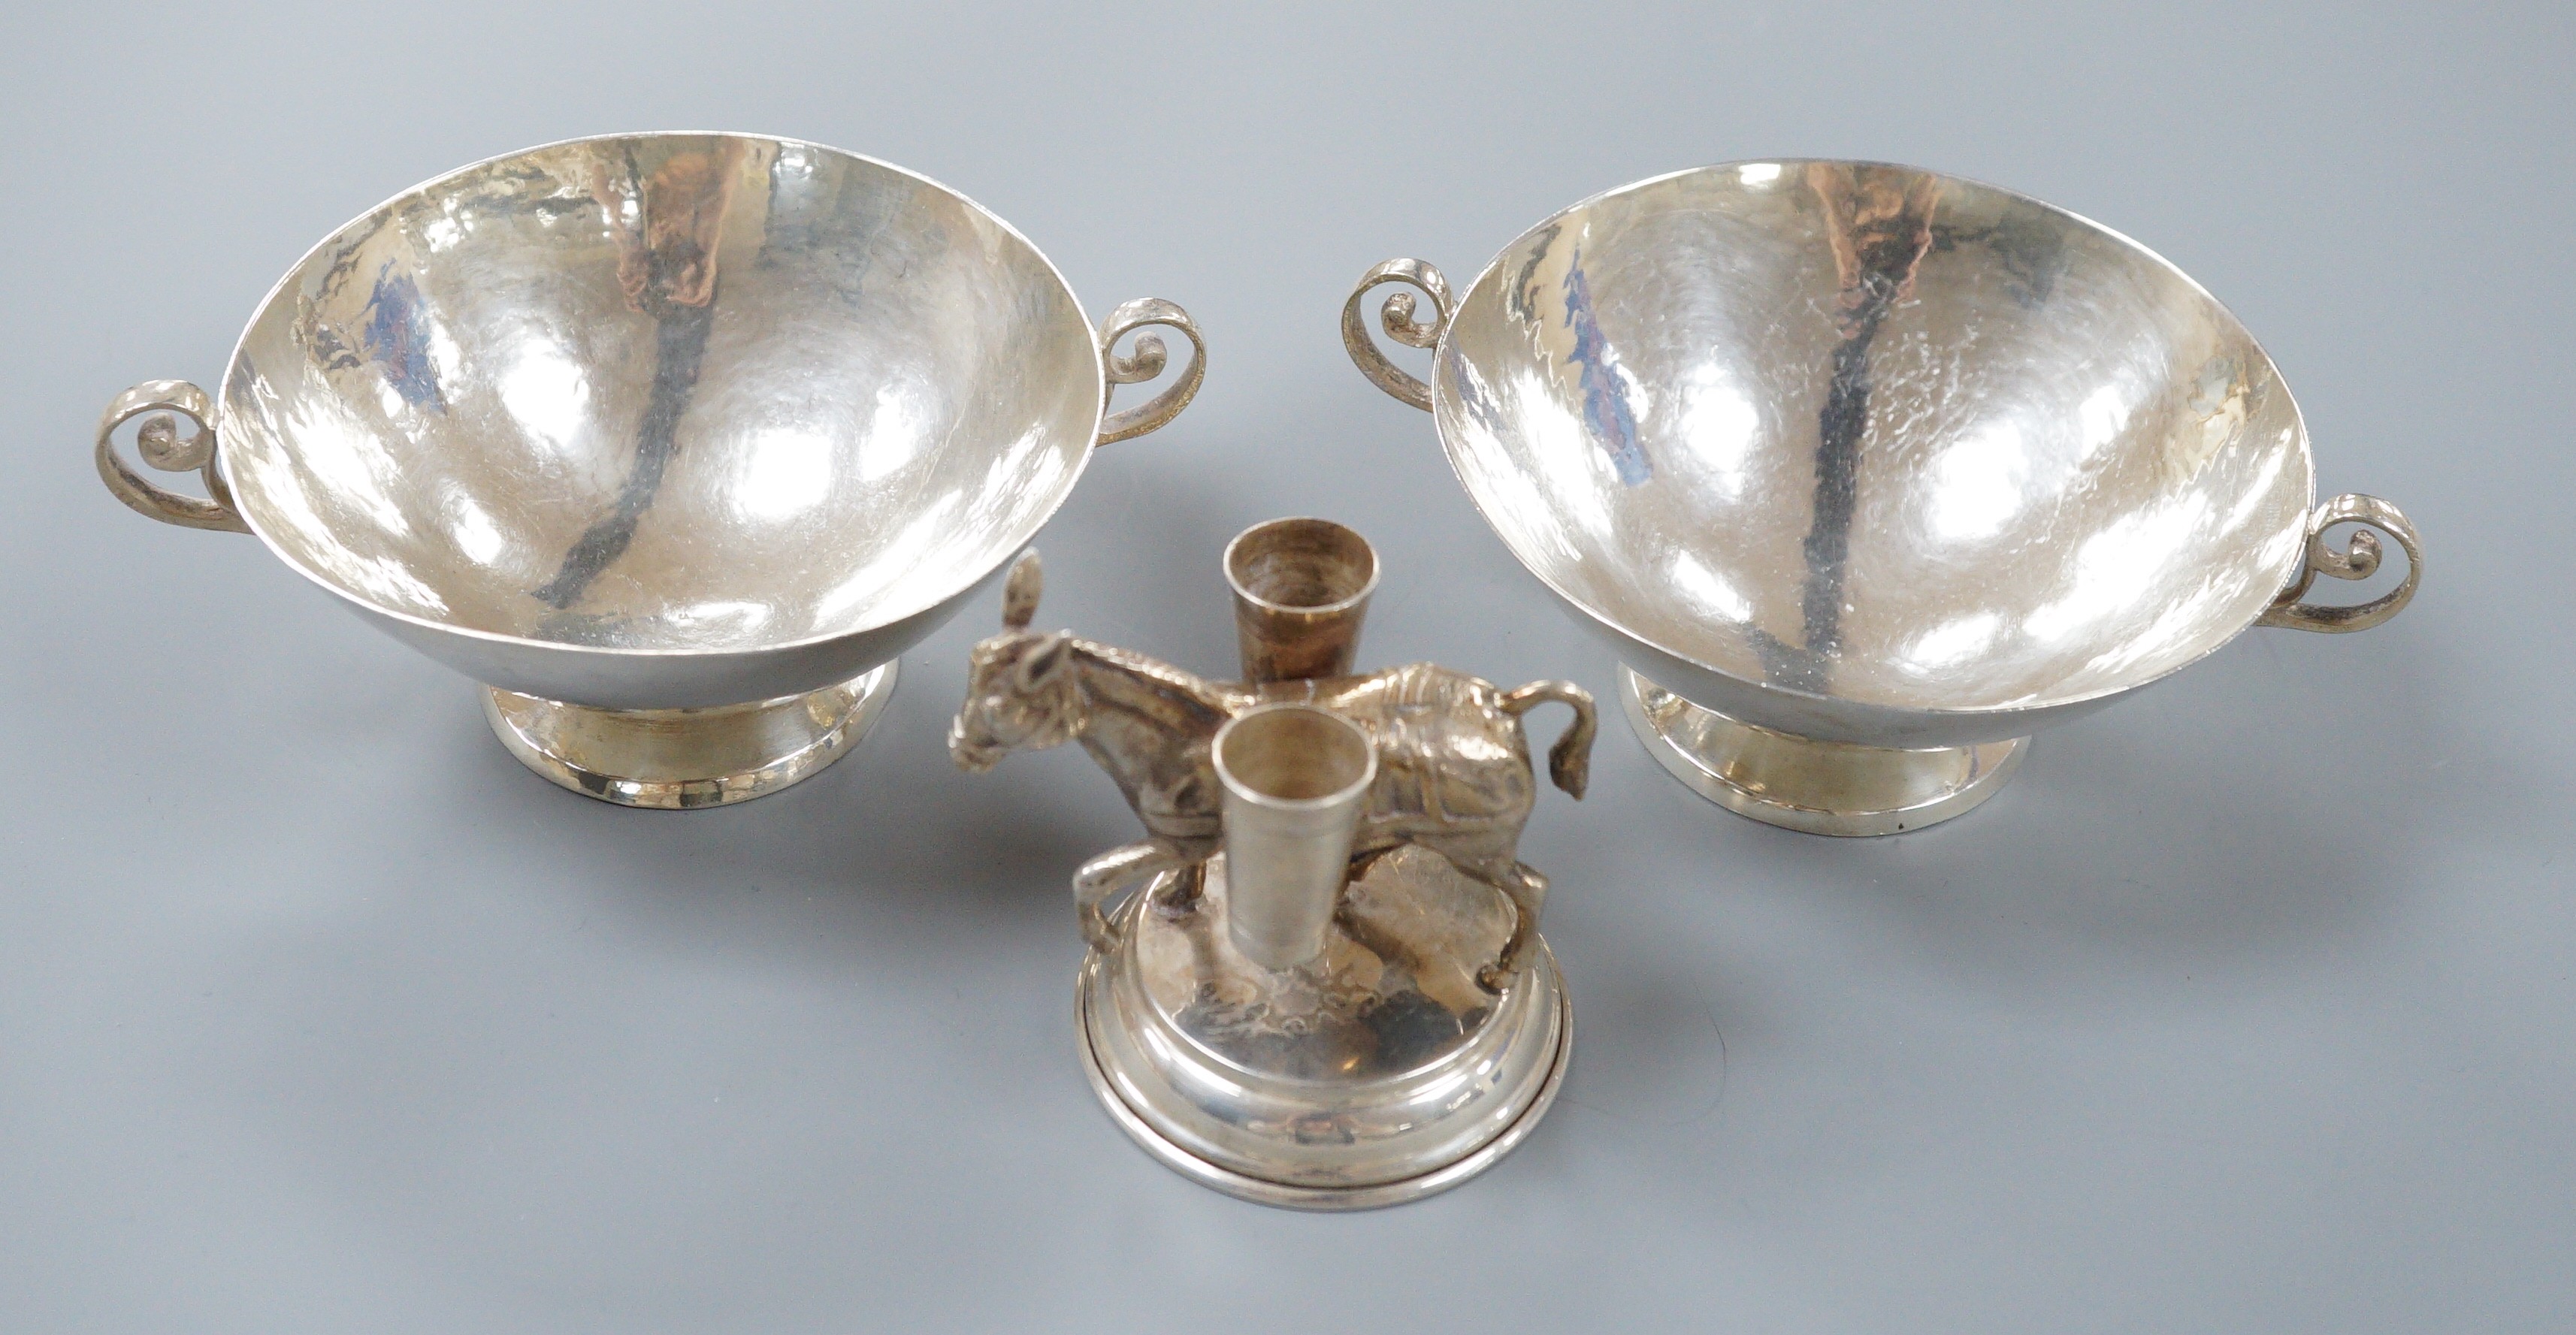 Two Chilean Hecho Amano 900 standard white metal two handle finger bowls, diameter 13.5cm and a Spanish white metal donkey vesta vase, 68mm.